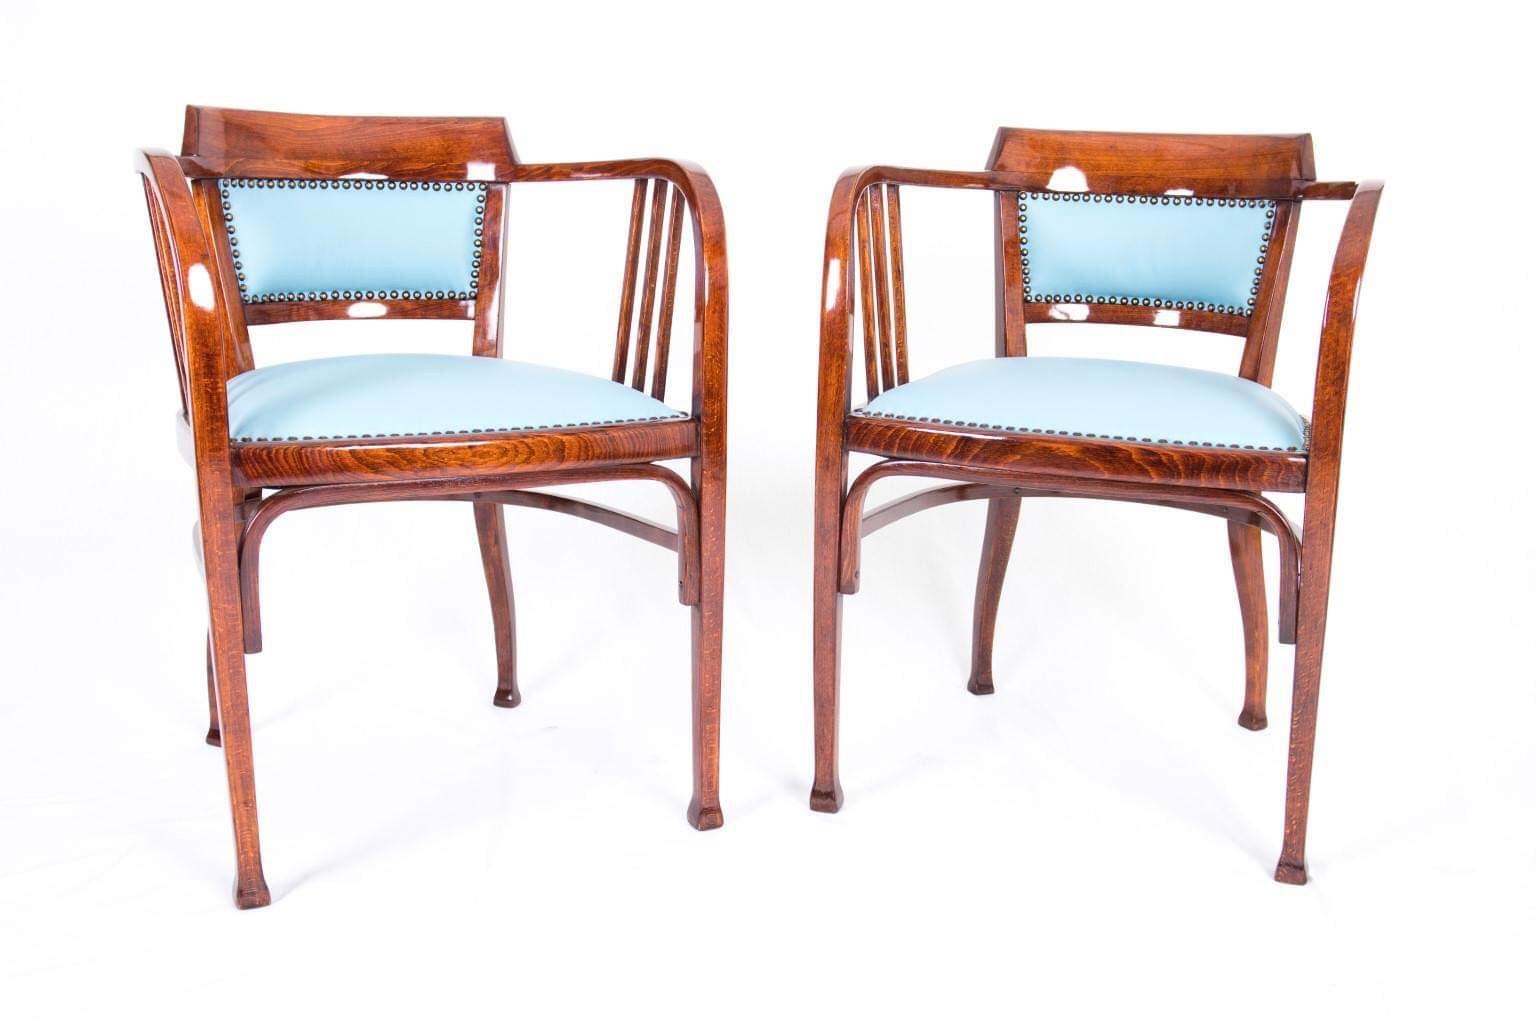 Two beautiful armchairs complete restored white shellac politur and new Italian blue leather upholstered, decorative nails.